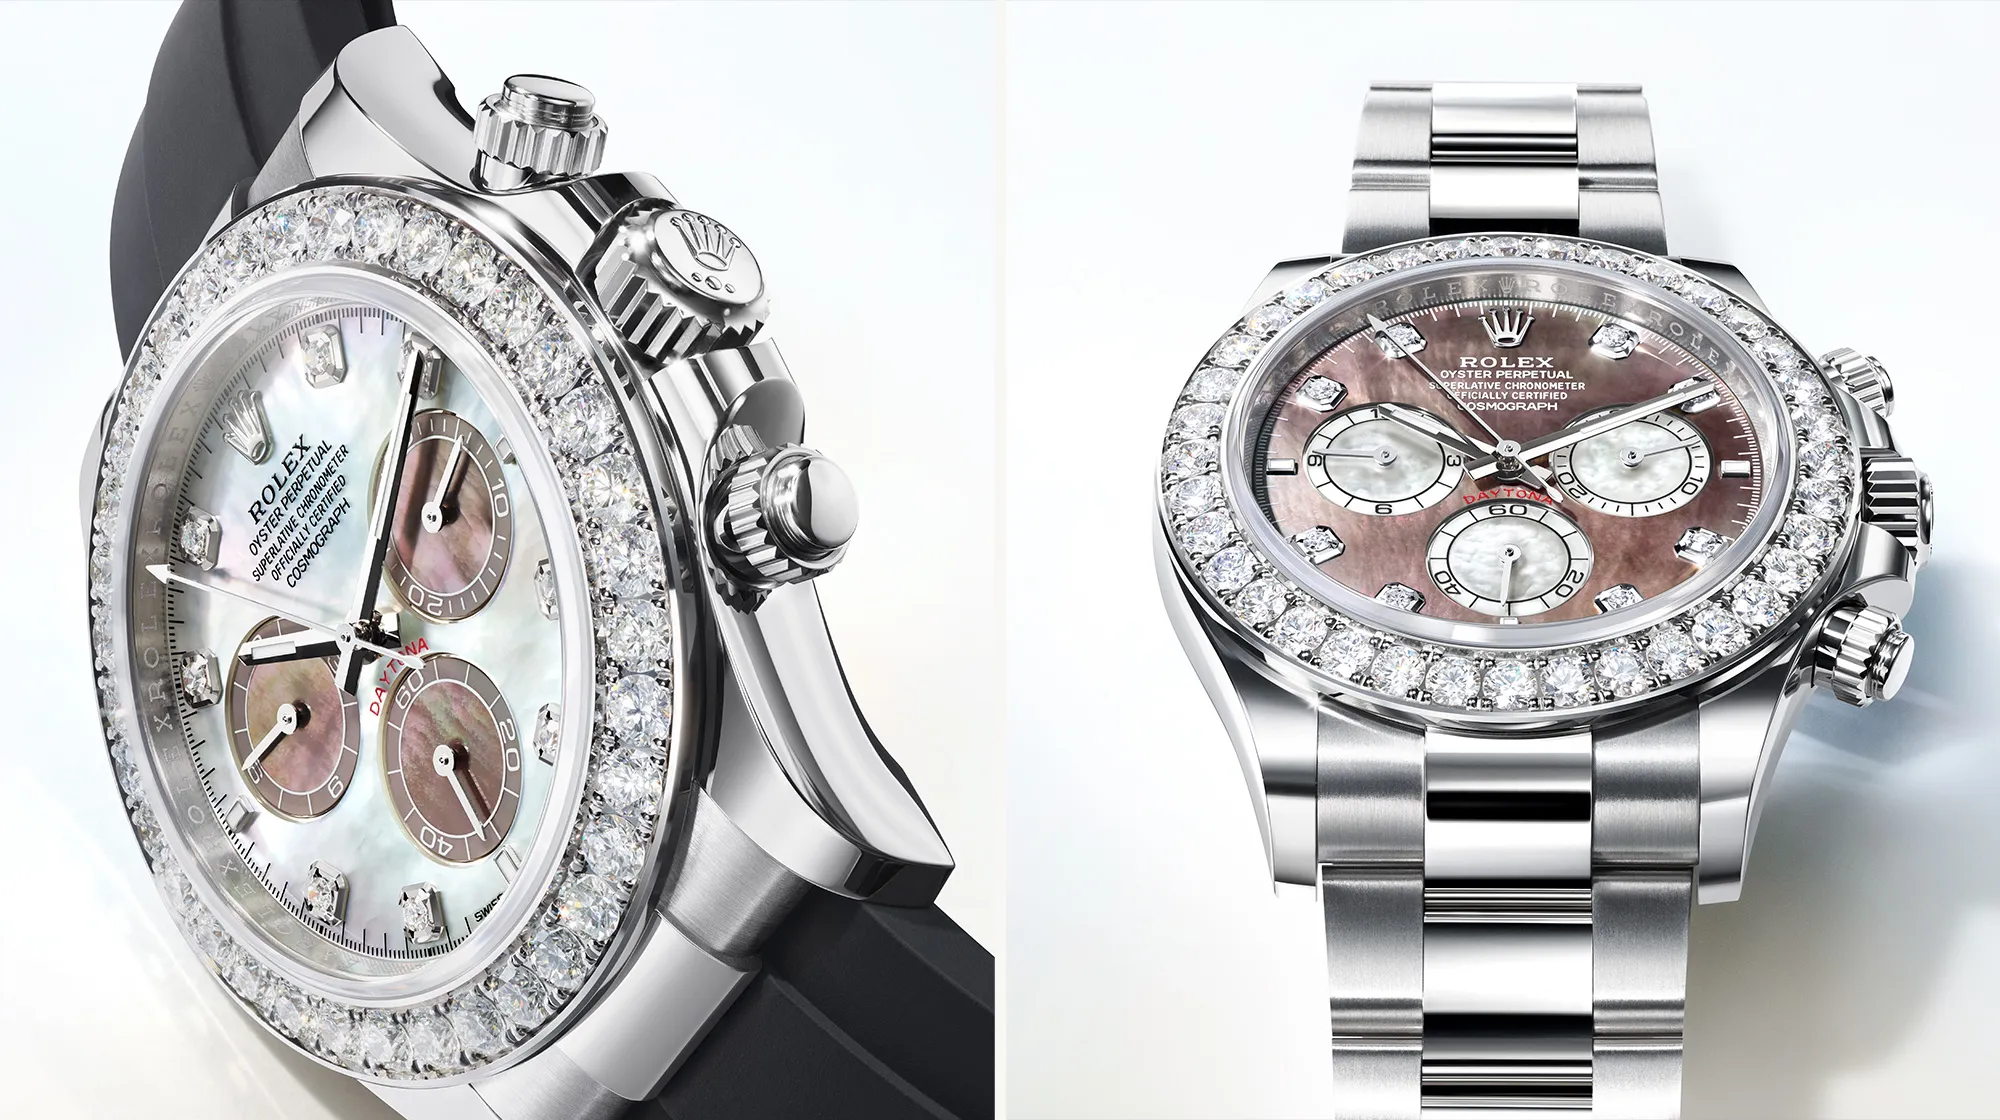 Rolex Cosmograph Daytona Watches - Time Avenue